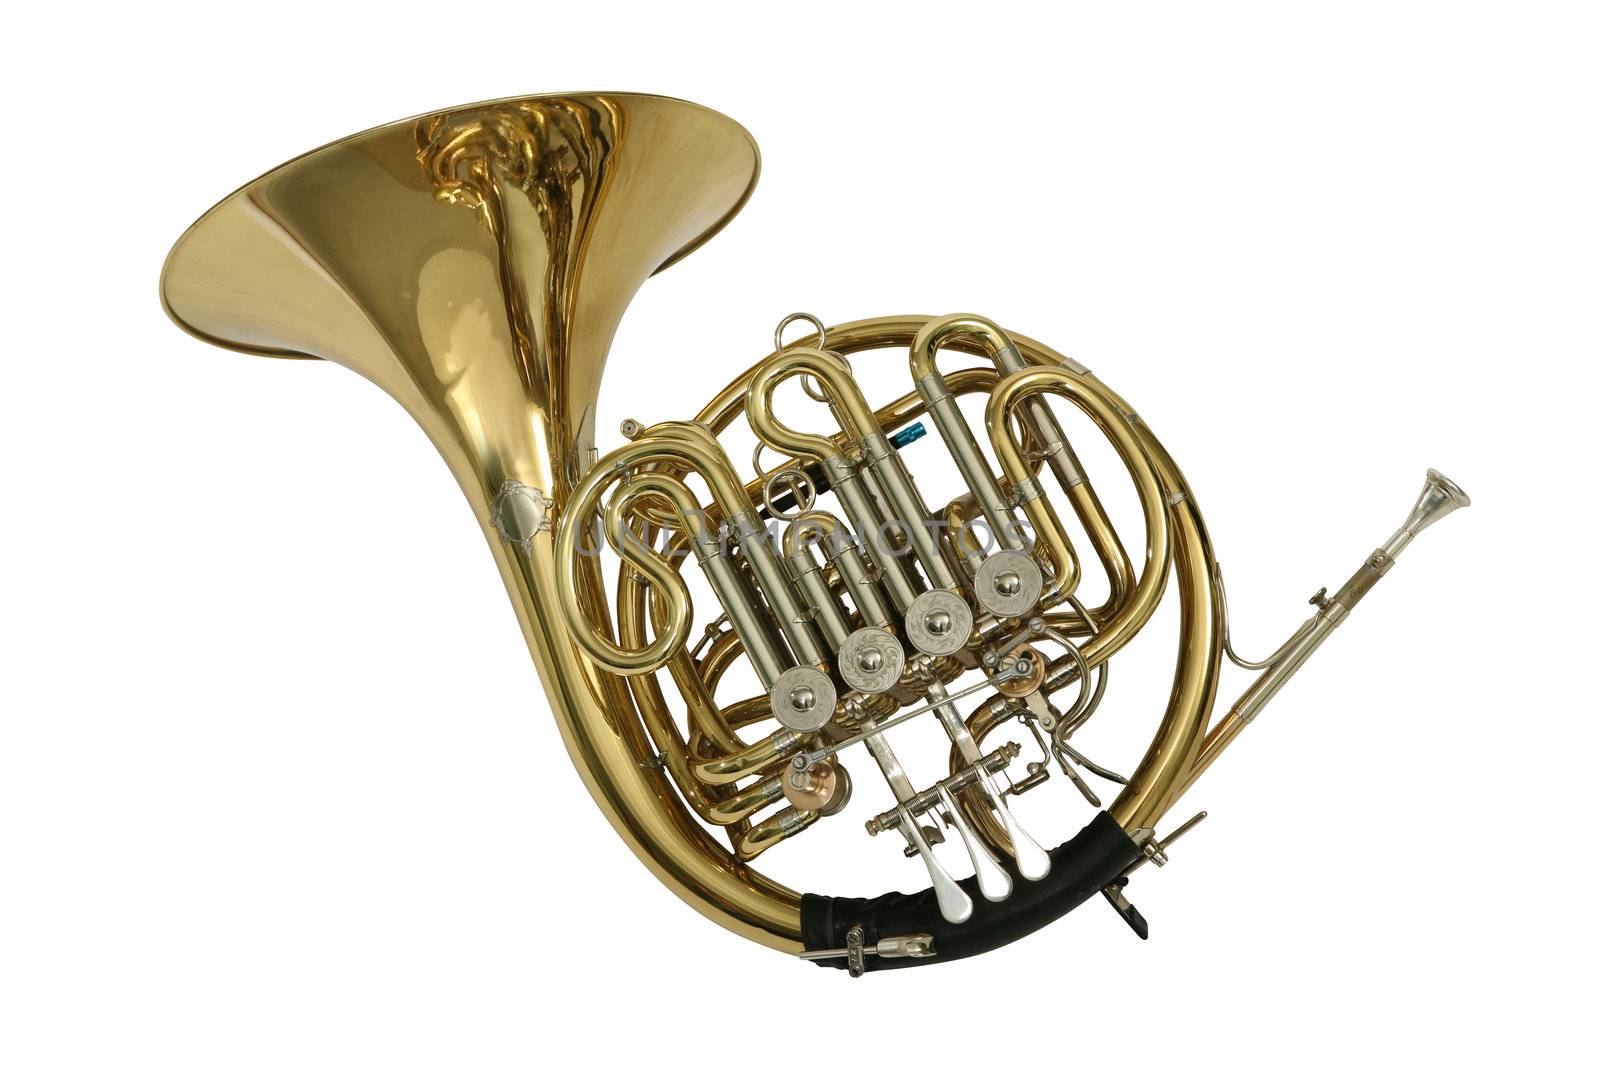 instrument voltorna on a white background